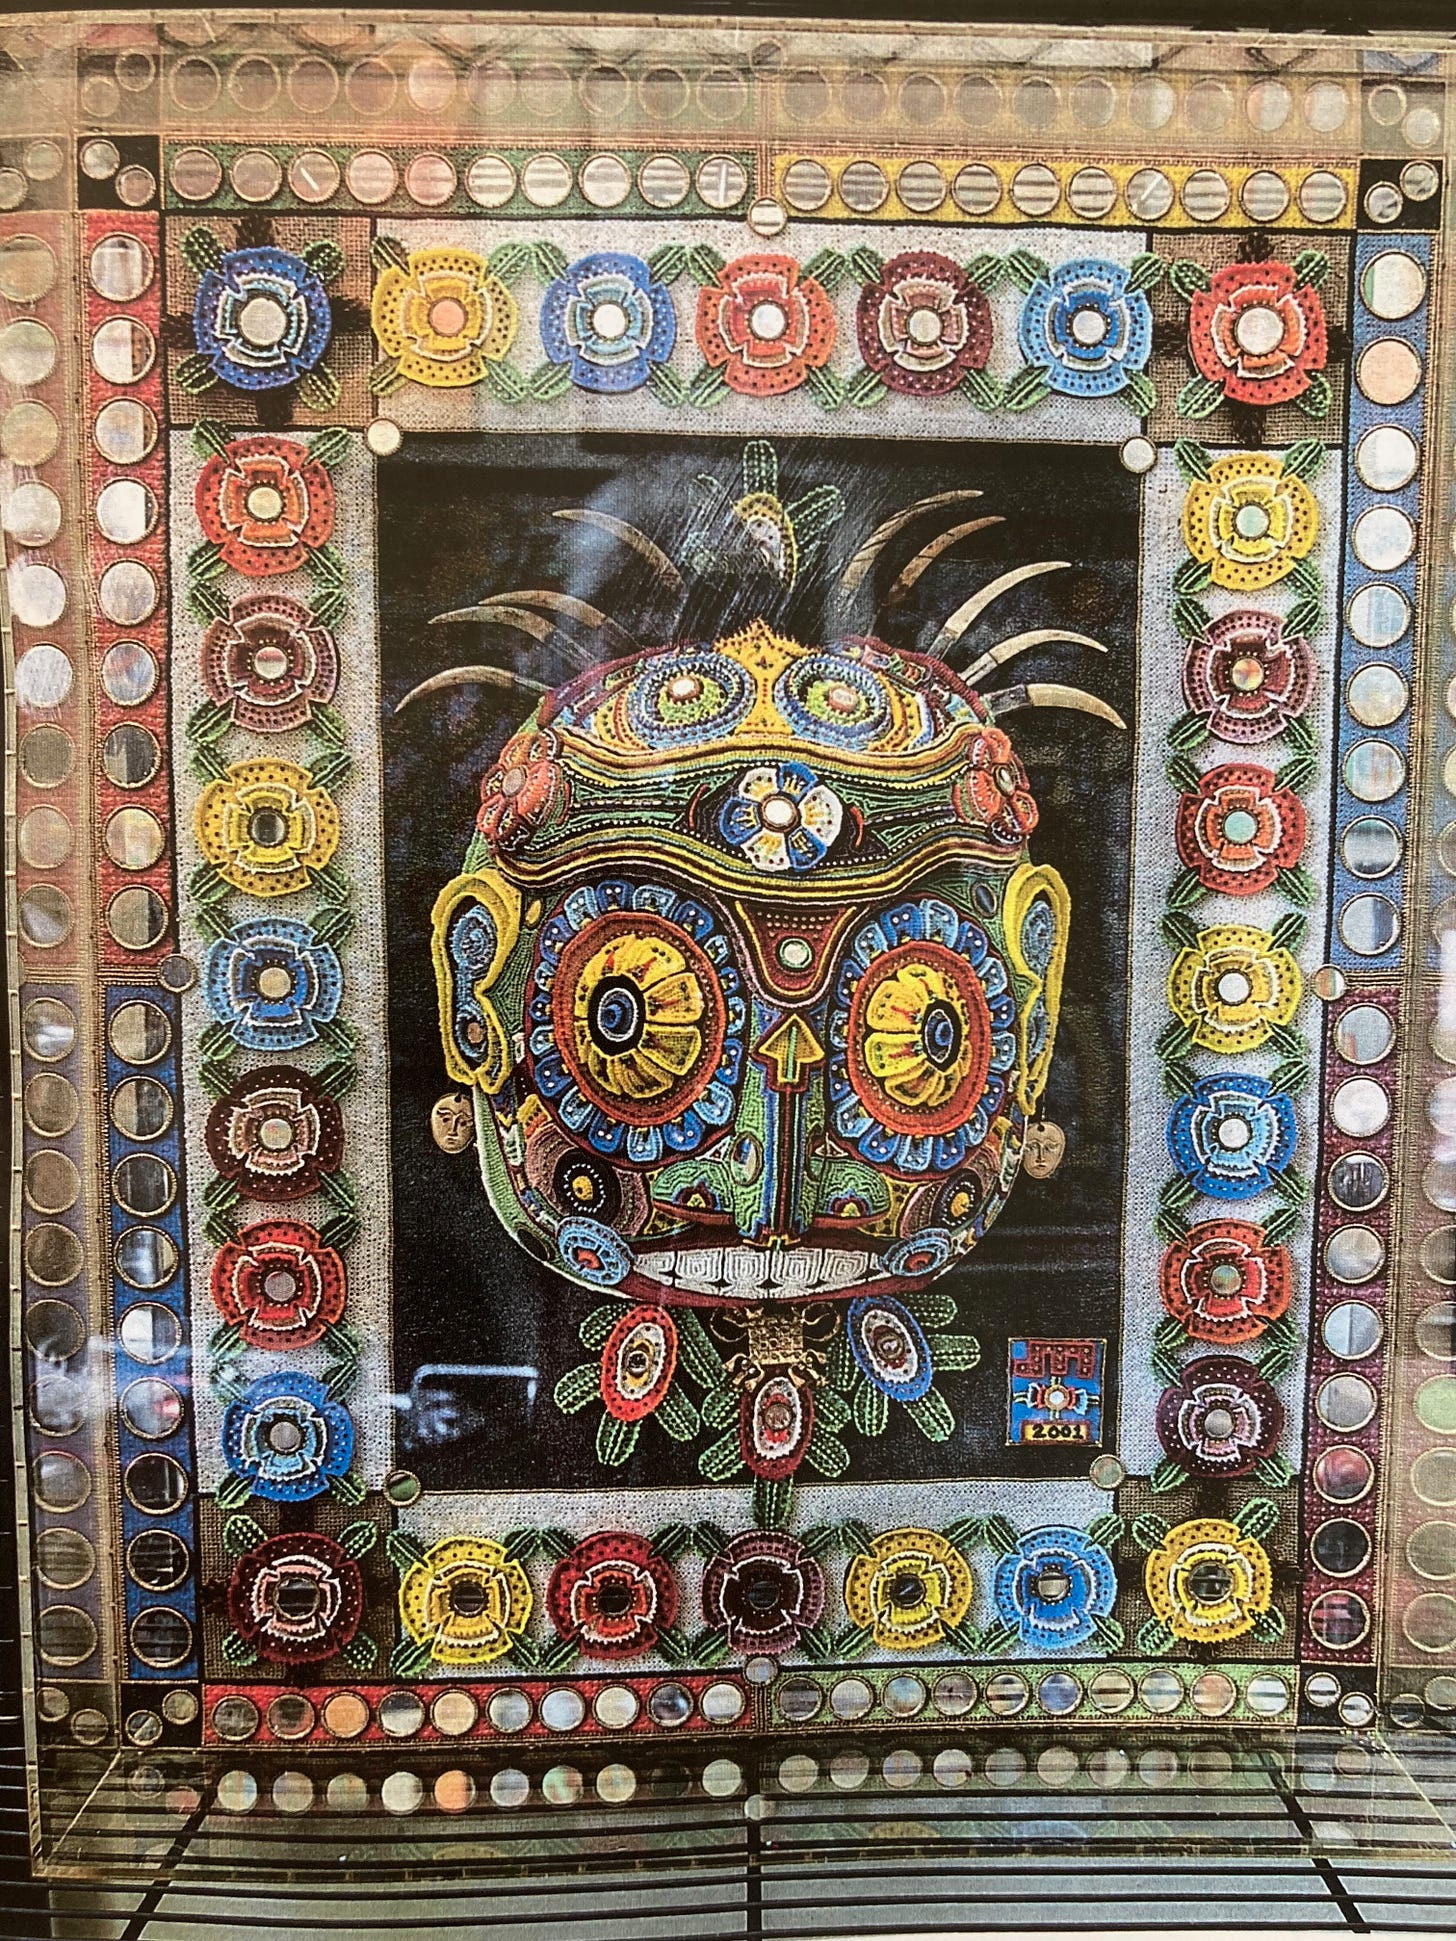 A wildly colorful artwork. At its center is the figure of a head, with all sorts of hallucinogenic elements.